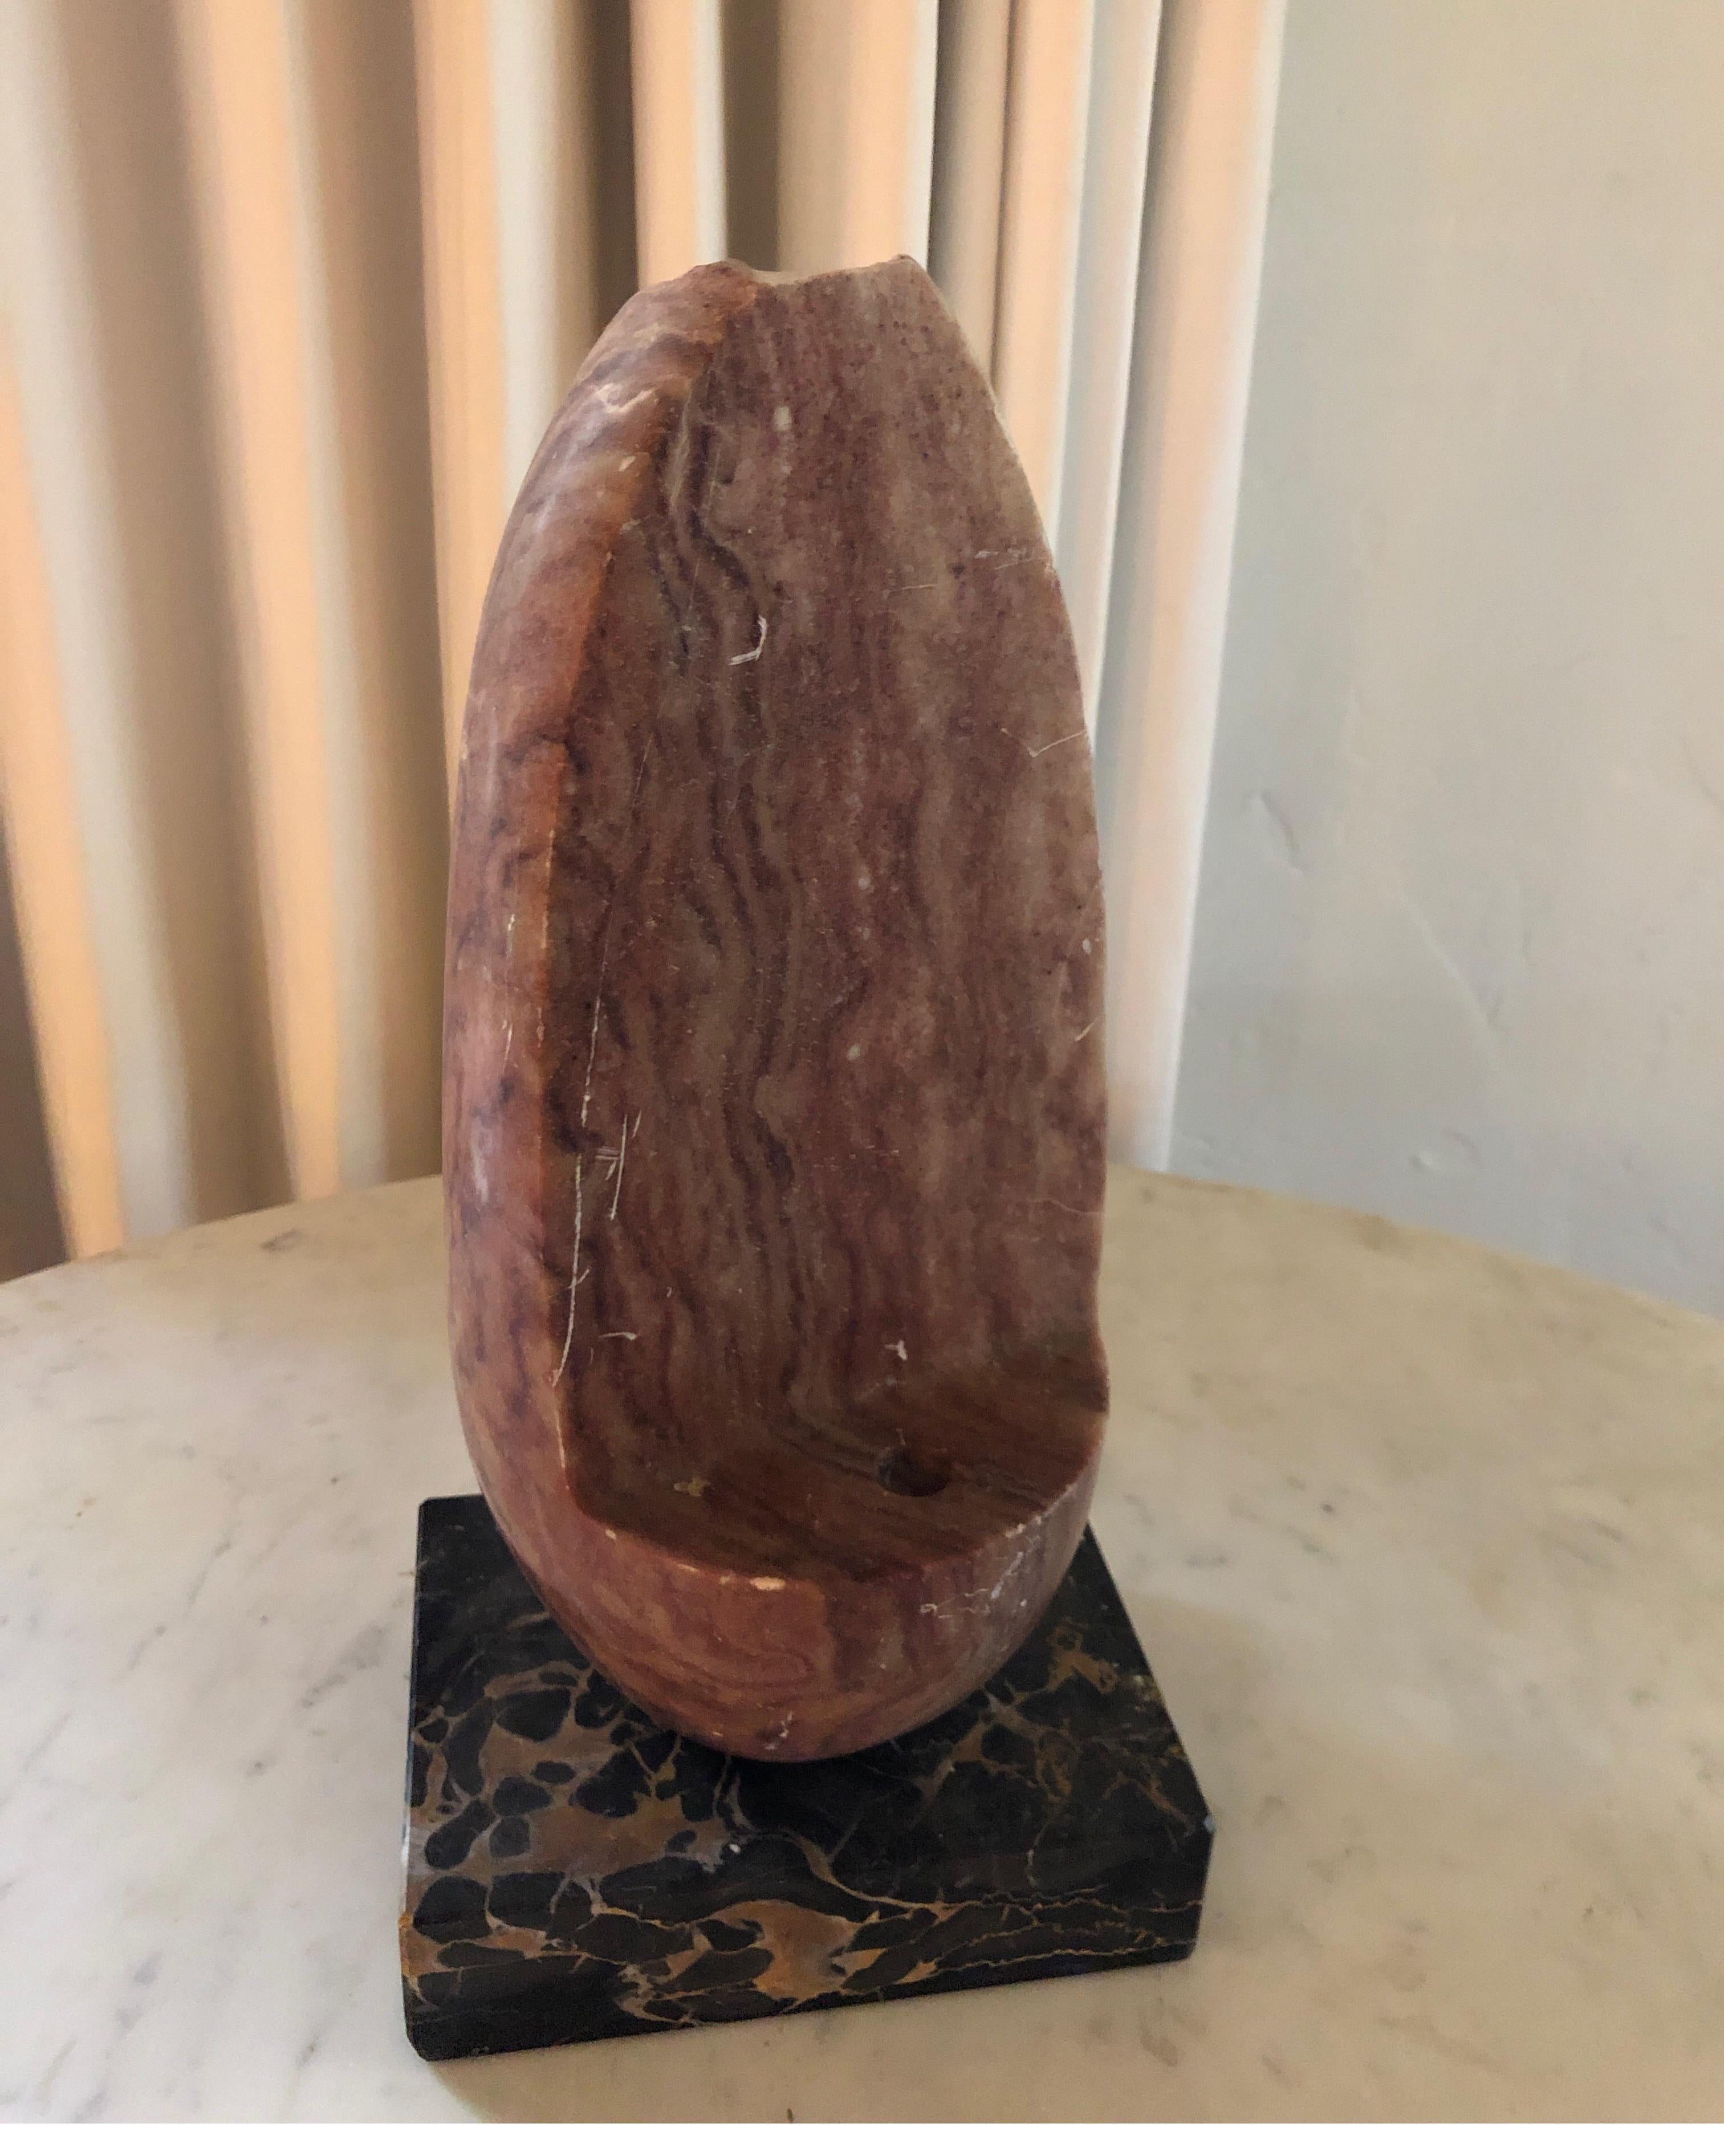 Vintage Yehuda Dodd Roth Signed Stone Sculpture For Sale 4